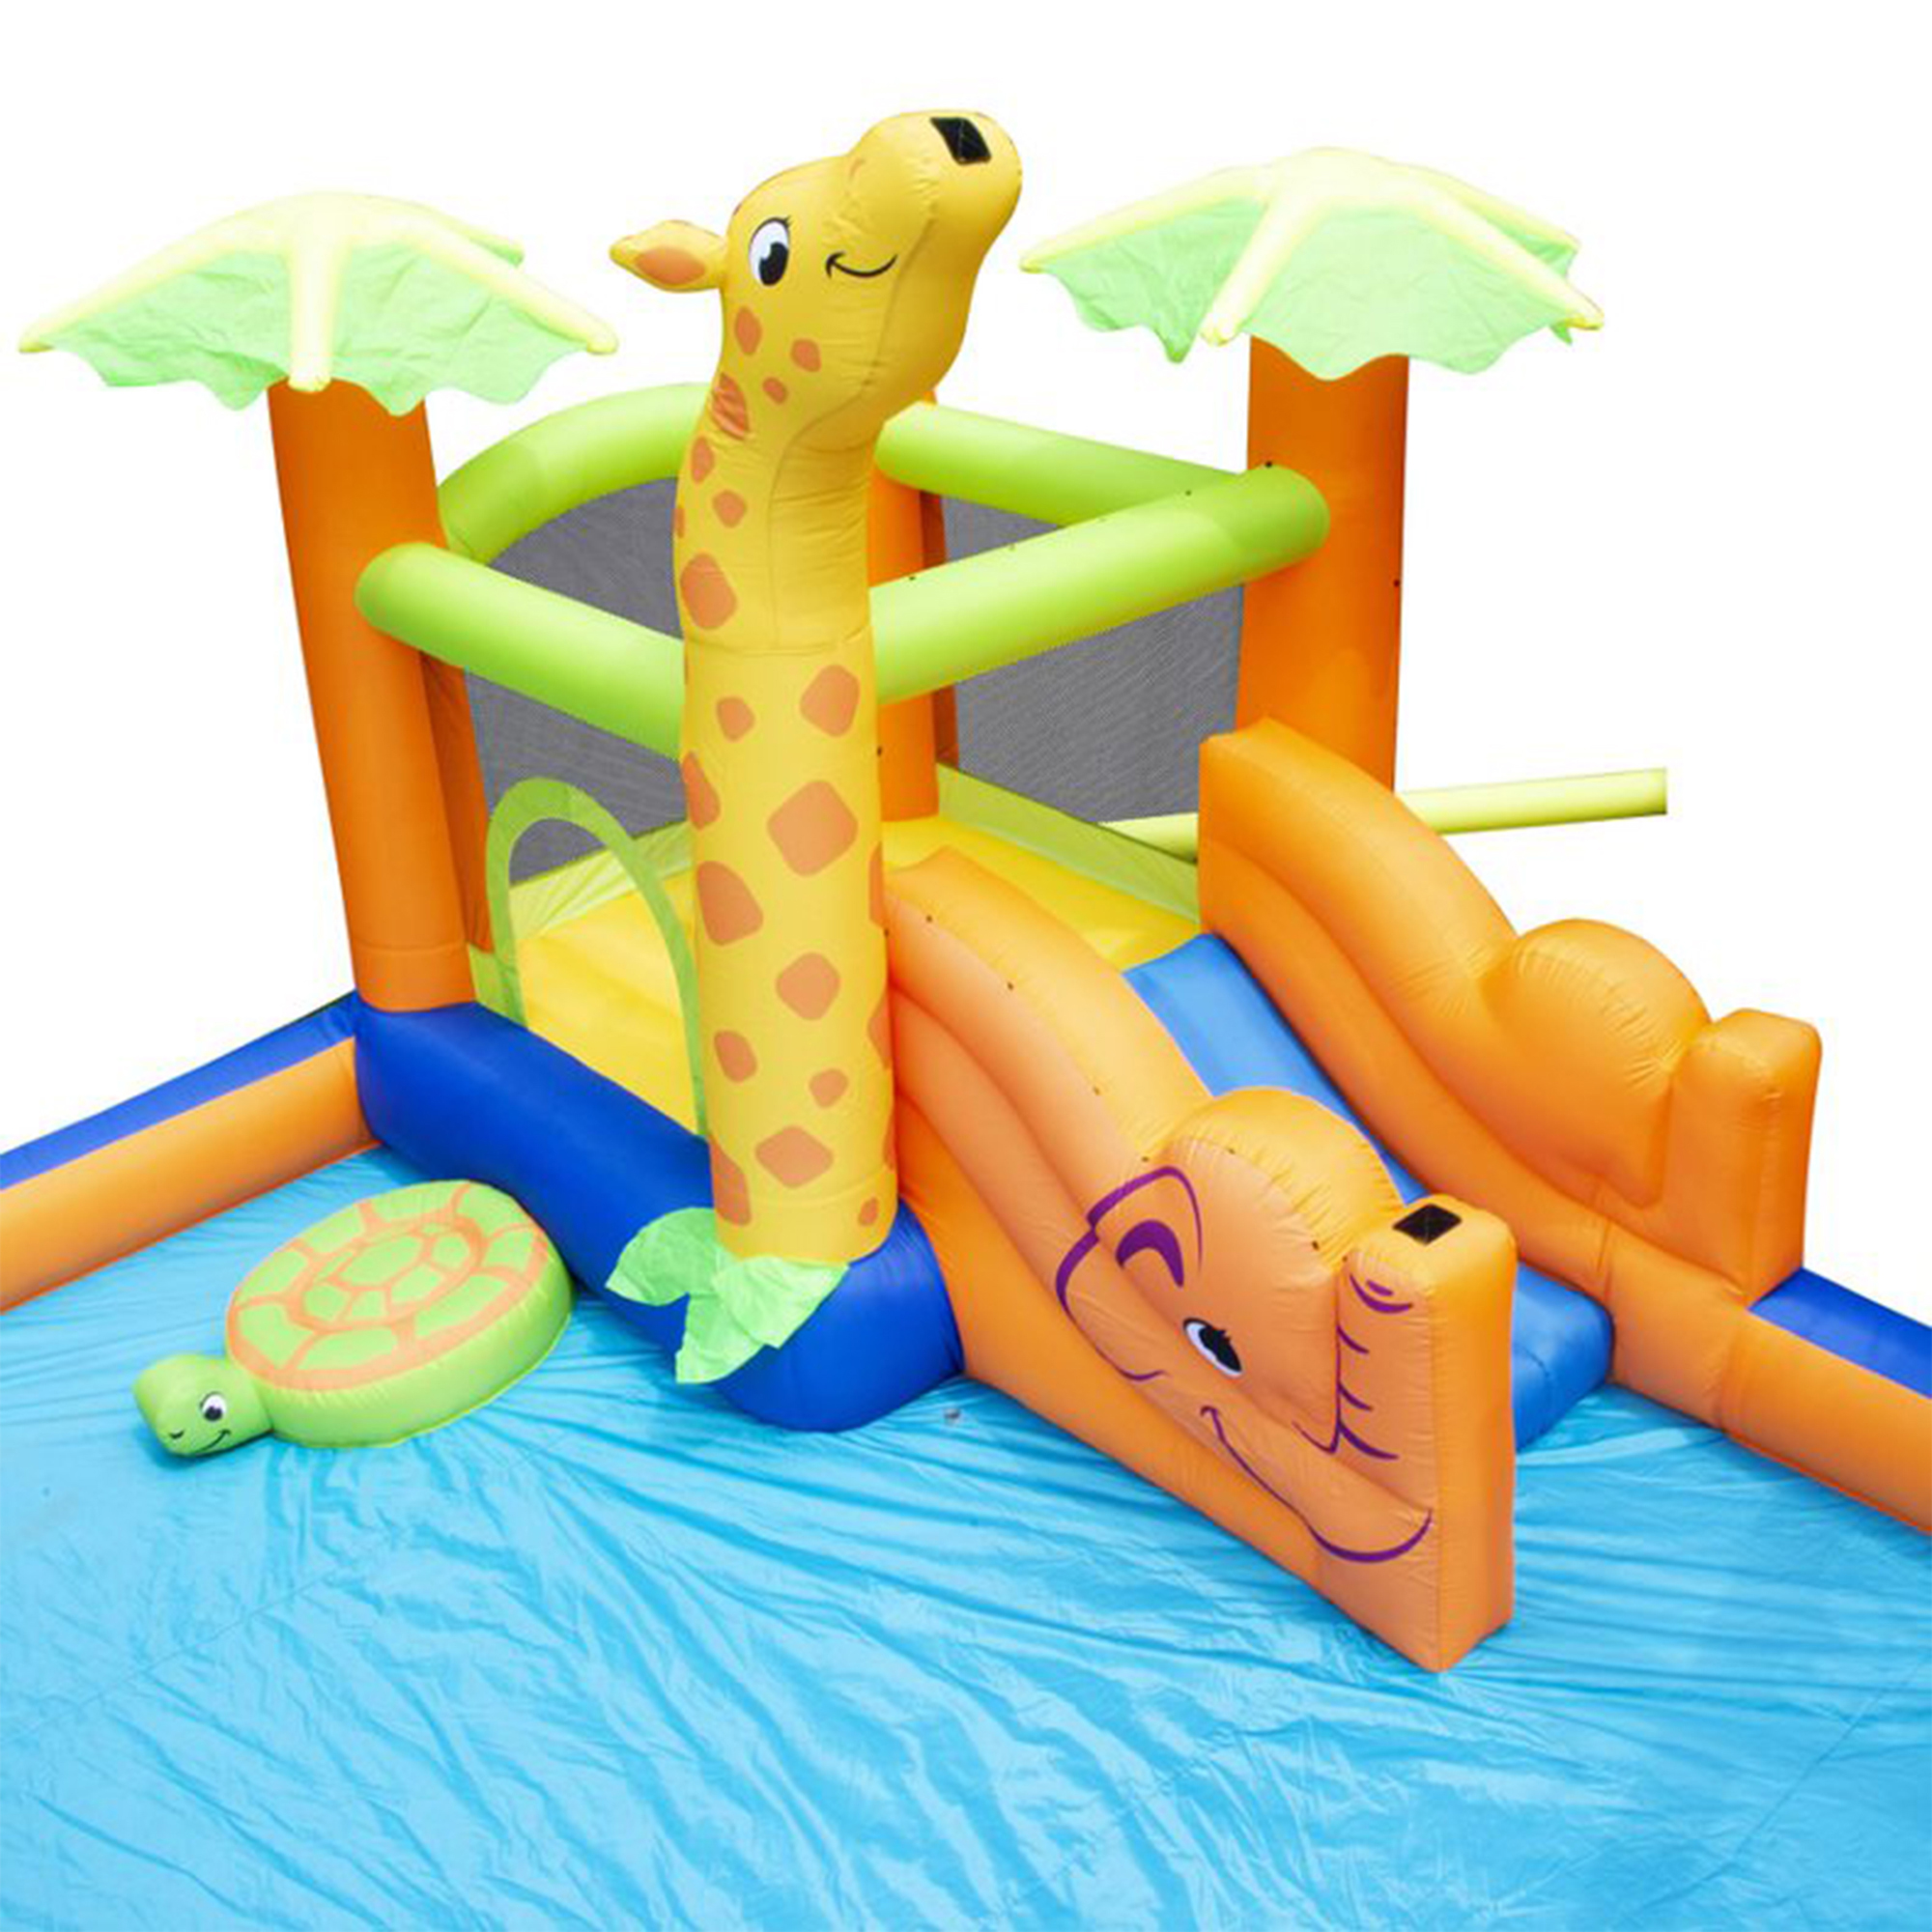 Banzai Safari Splash Water Park Inflatable Bouncer with Cannon and Blower - image 8 of 12